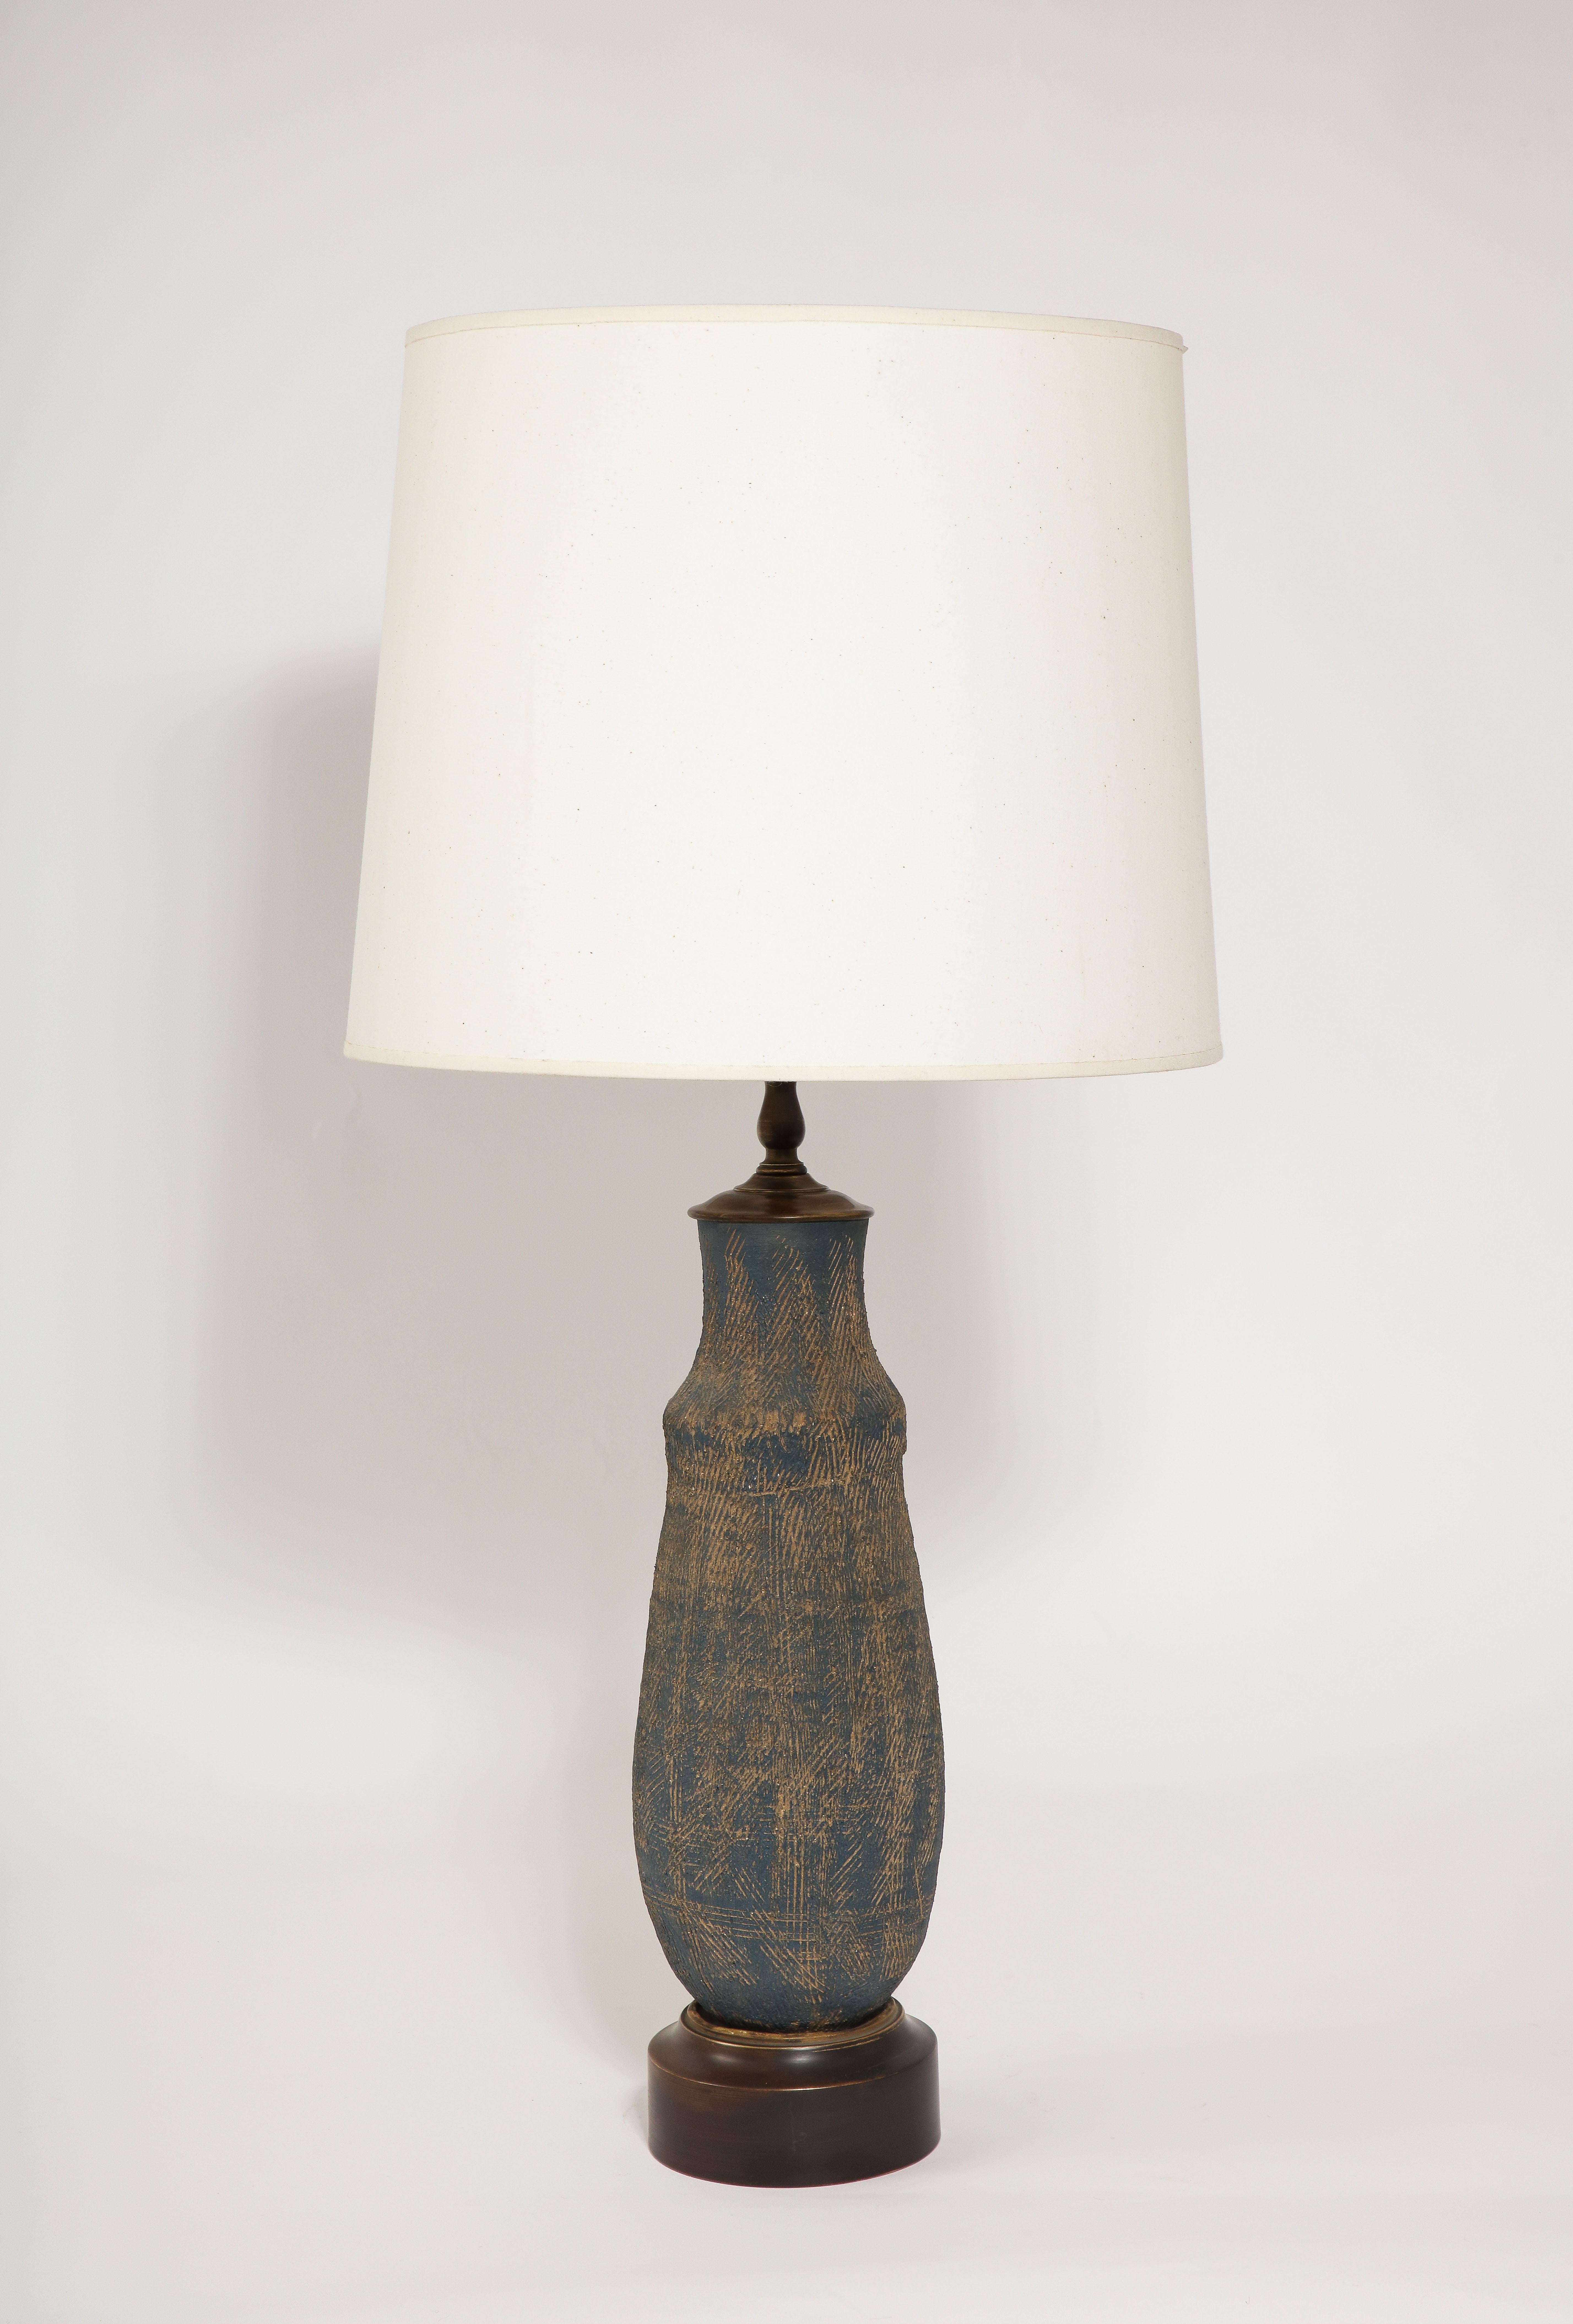 Incised Ceramic Table lamp, USA 1950's For Sale 6